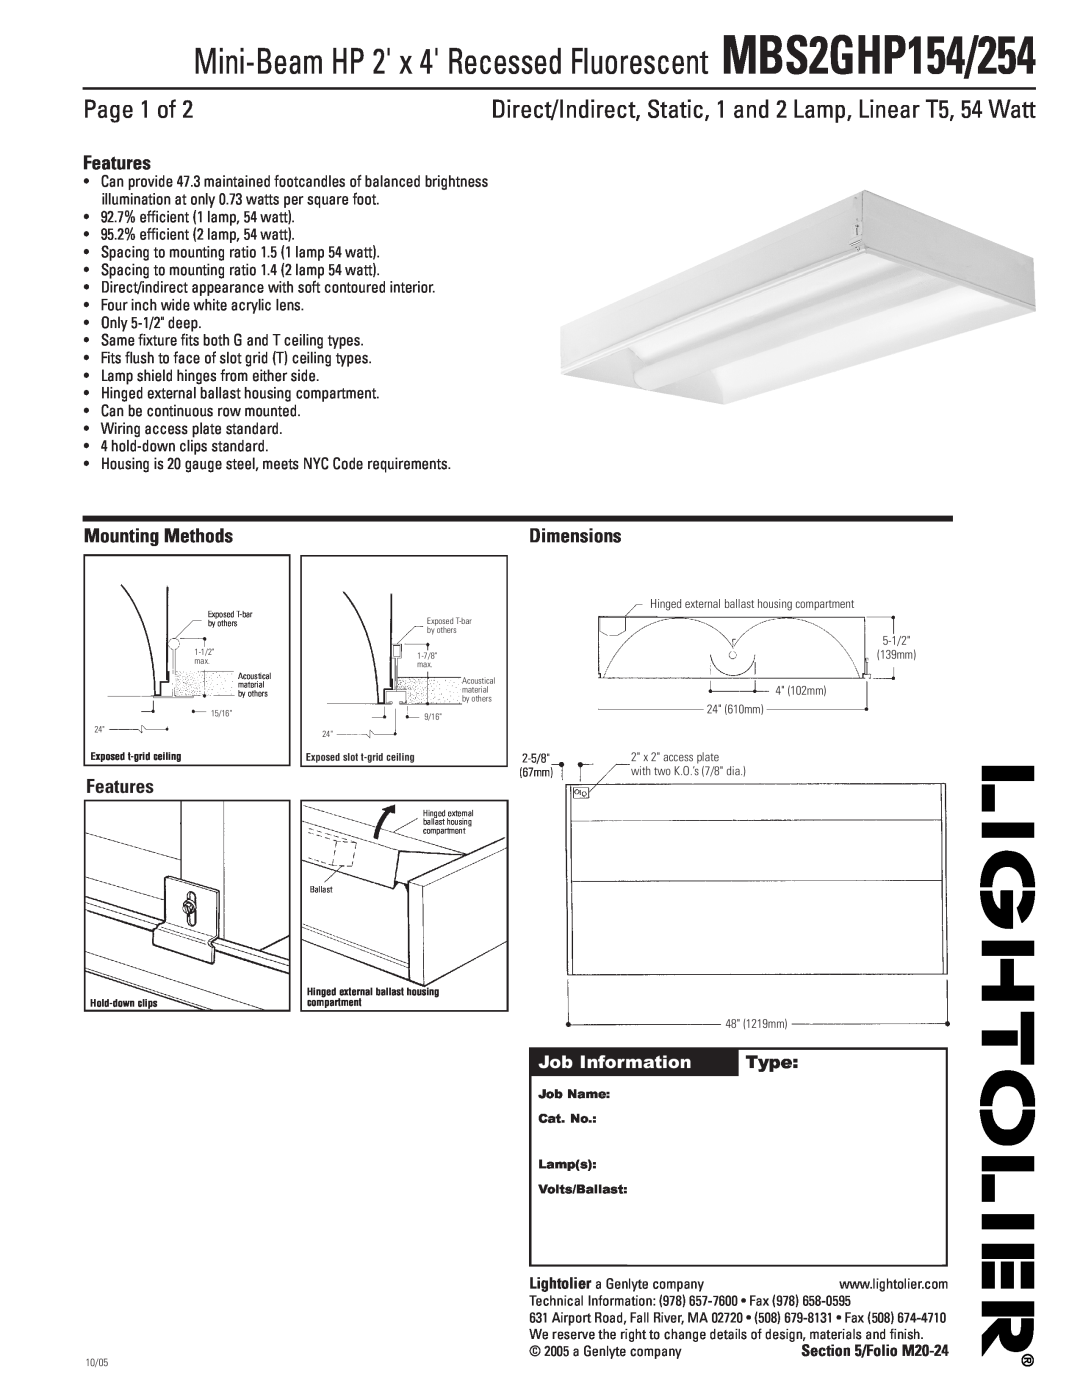 Lightolier MBS2GHP154, MBS2GHP254 dimensions Page 1 of, Features, Mounting Methods, Job Information, Type, Dimensions 